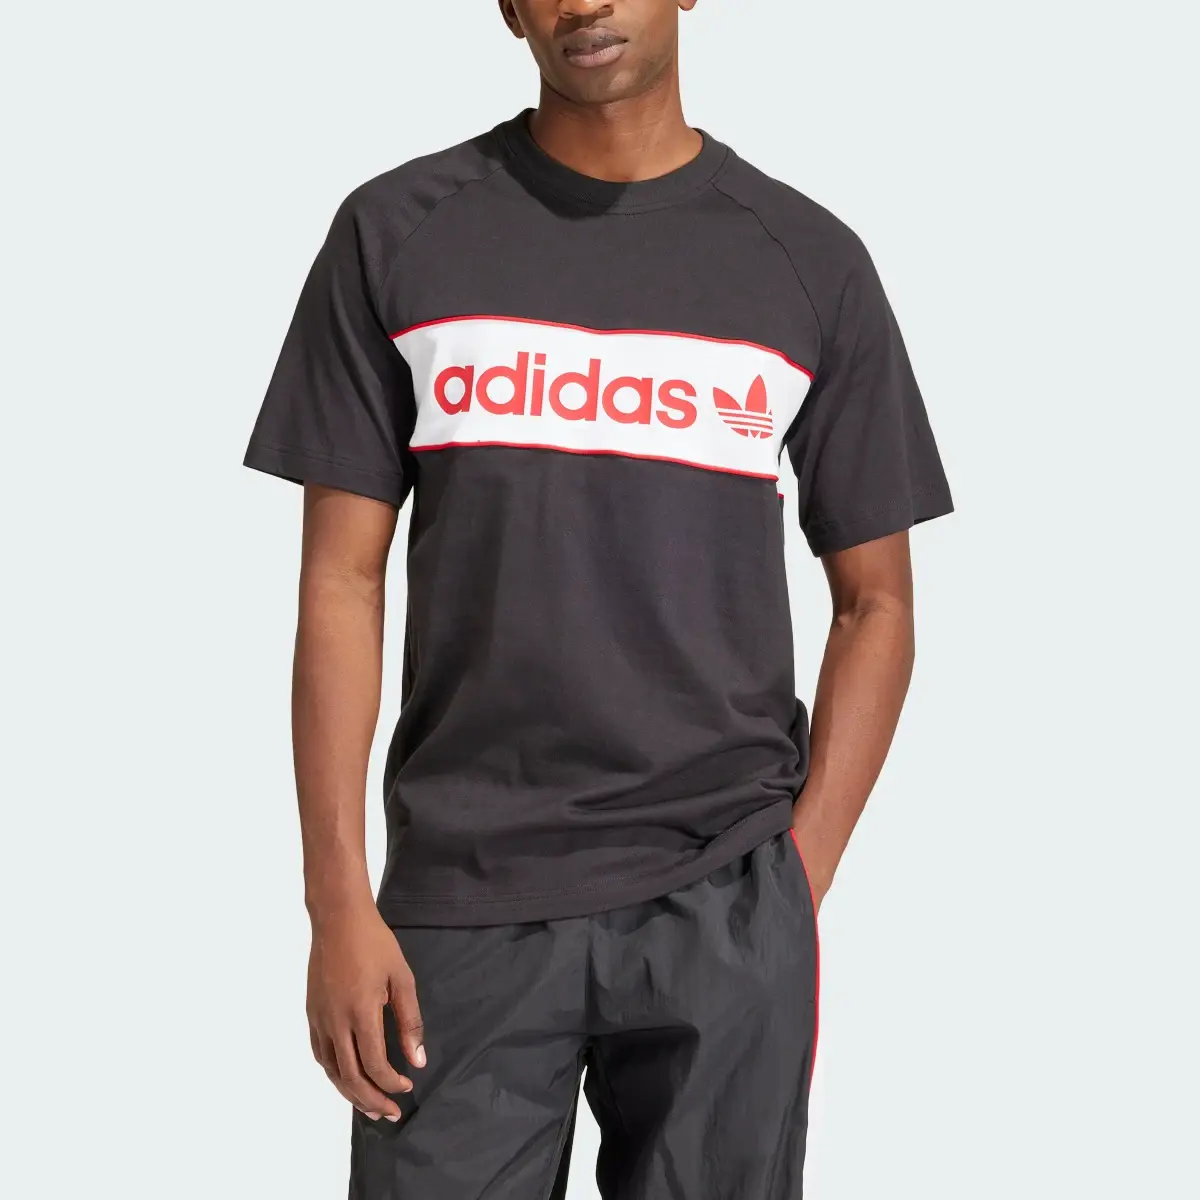 Adidas T-shirt Archive. 1